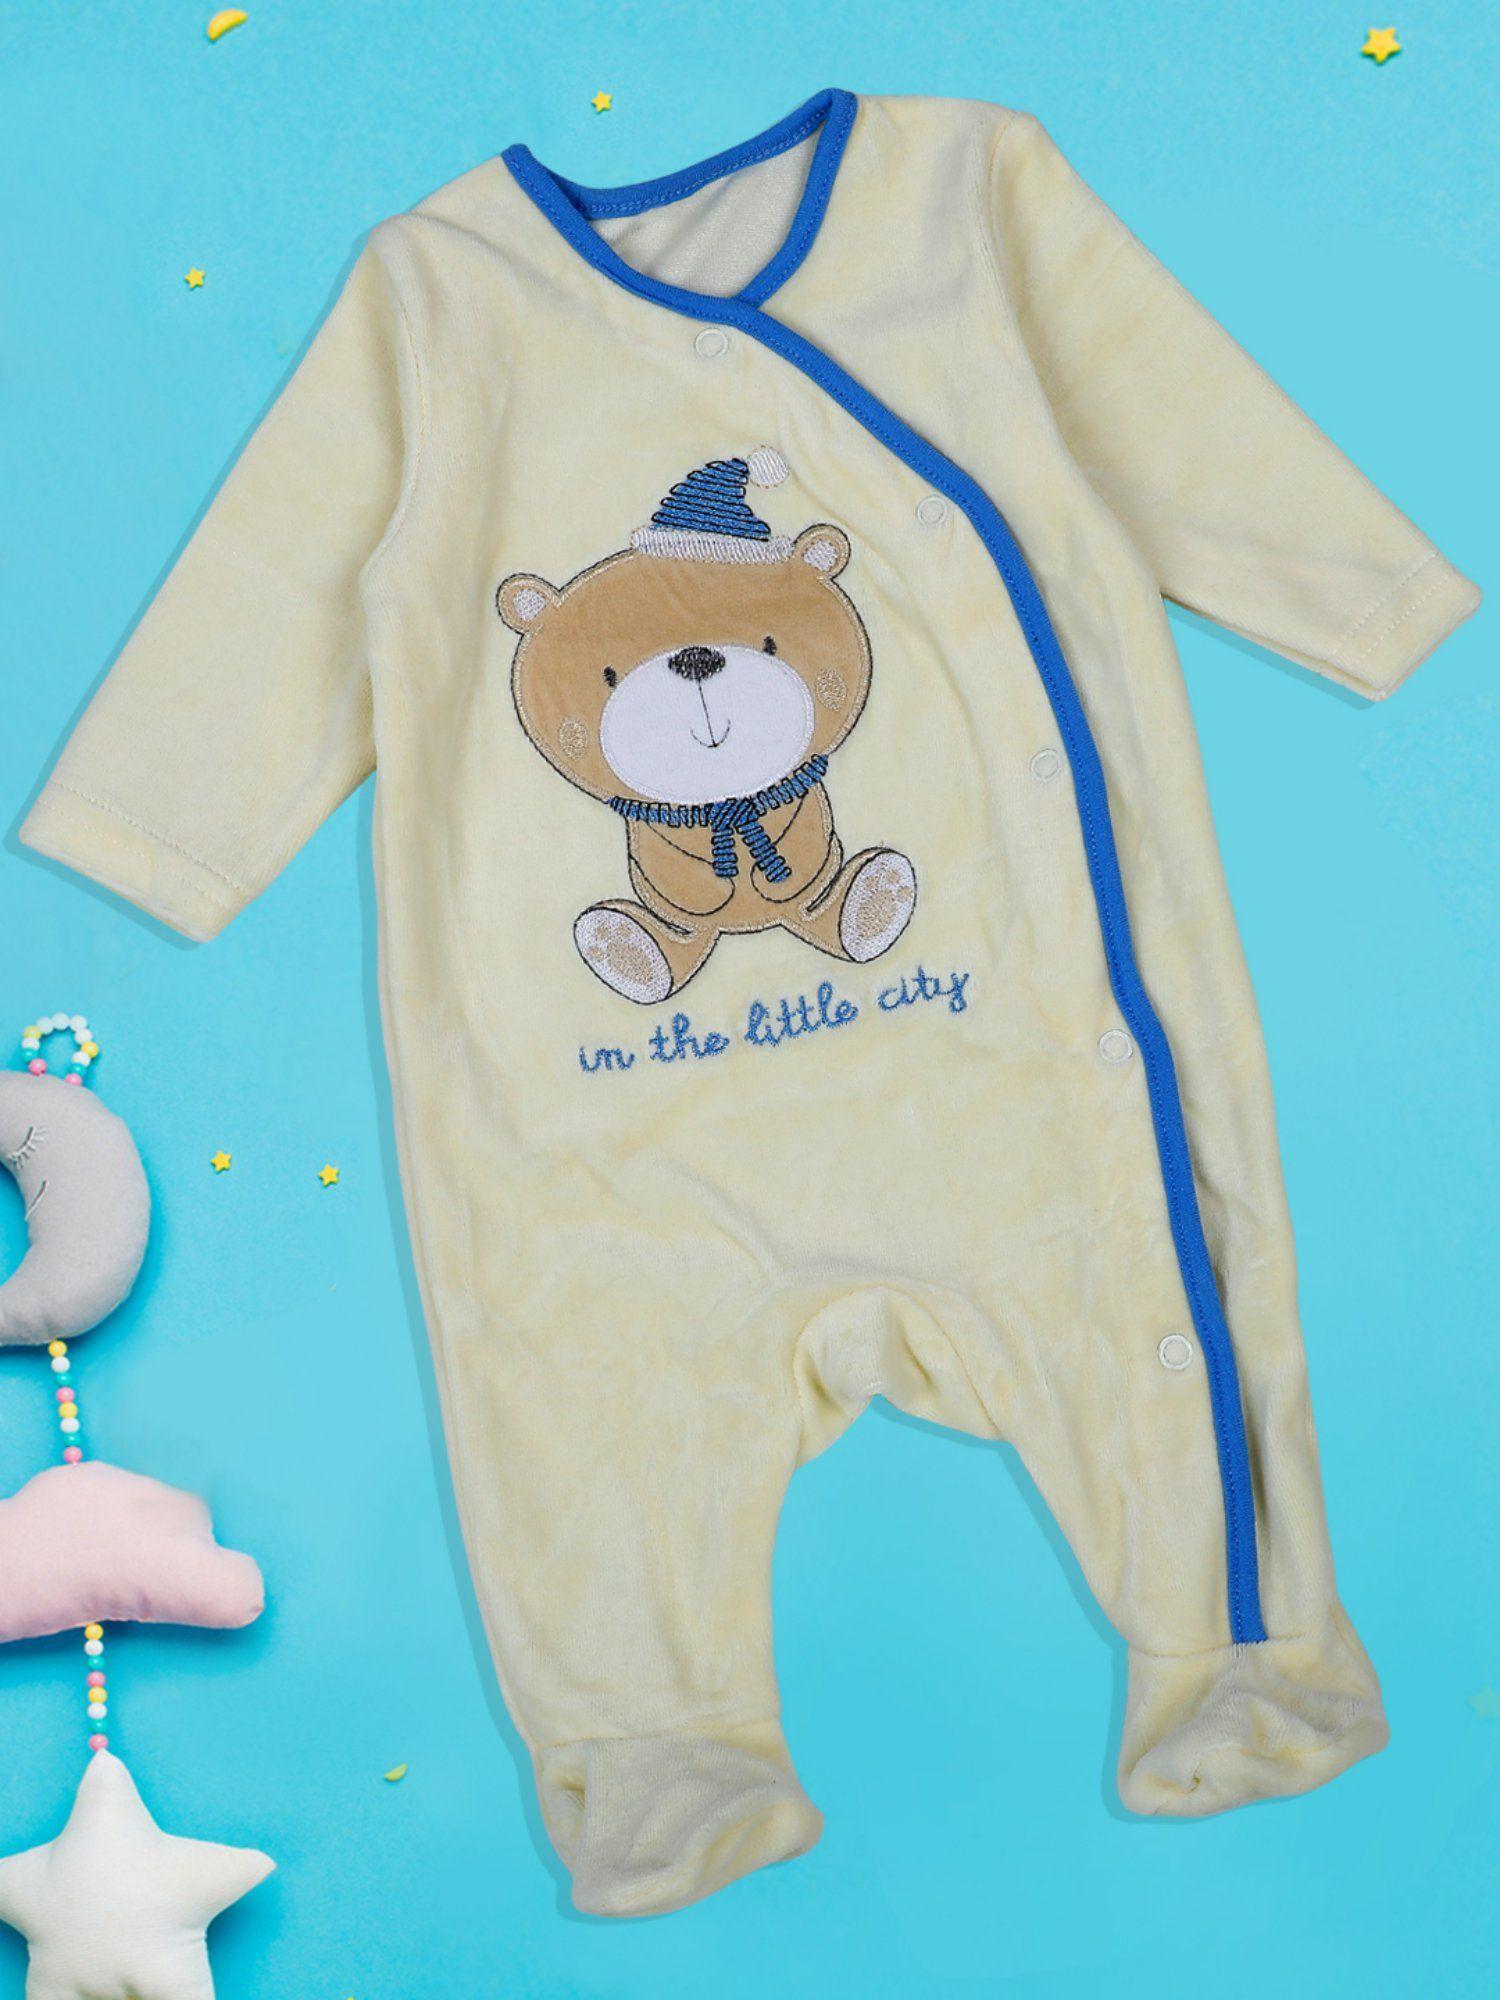 bear-in-the-city-infant-full-sleeves-snap-button-bodysuit-romper-yellow